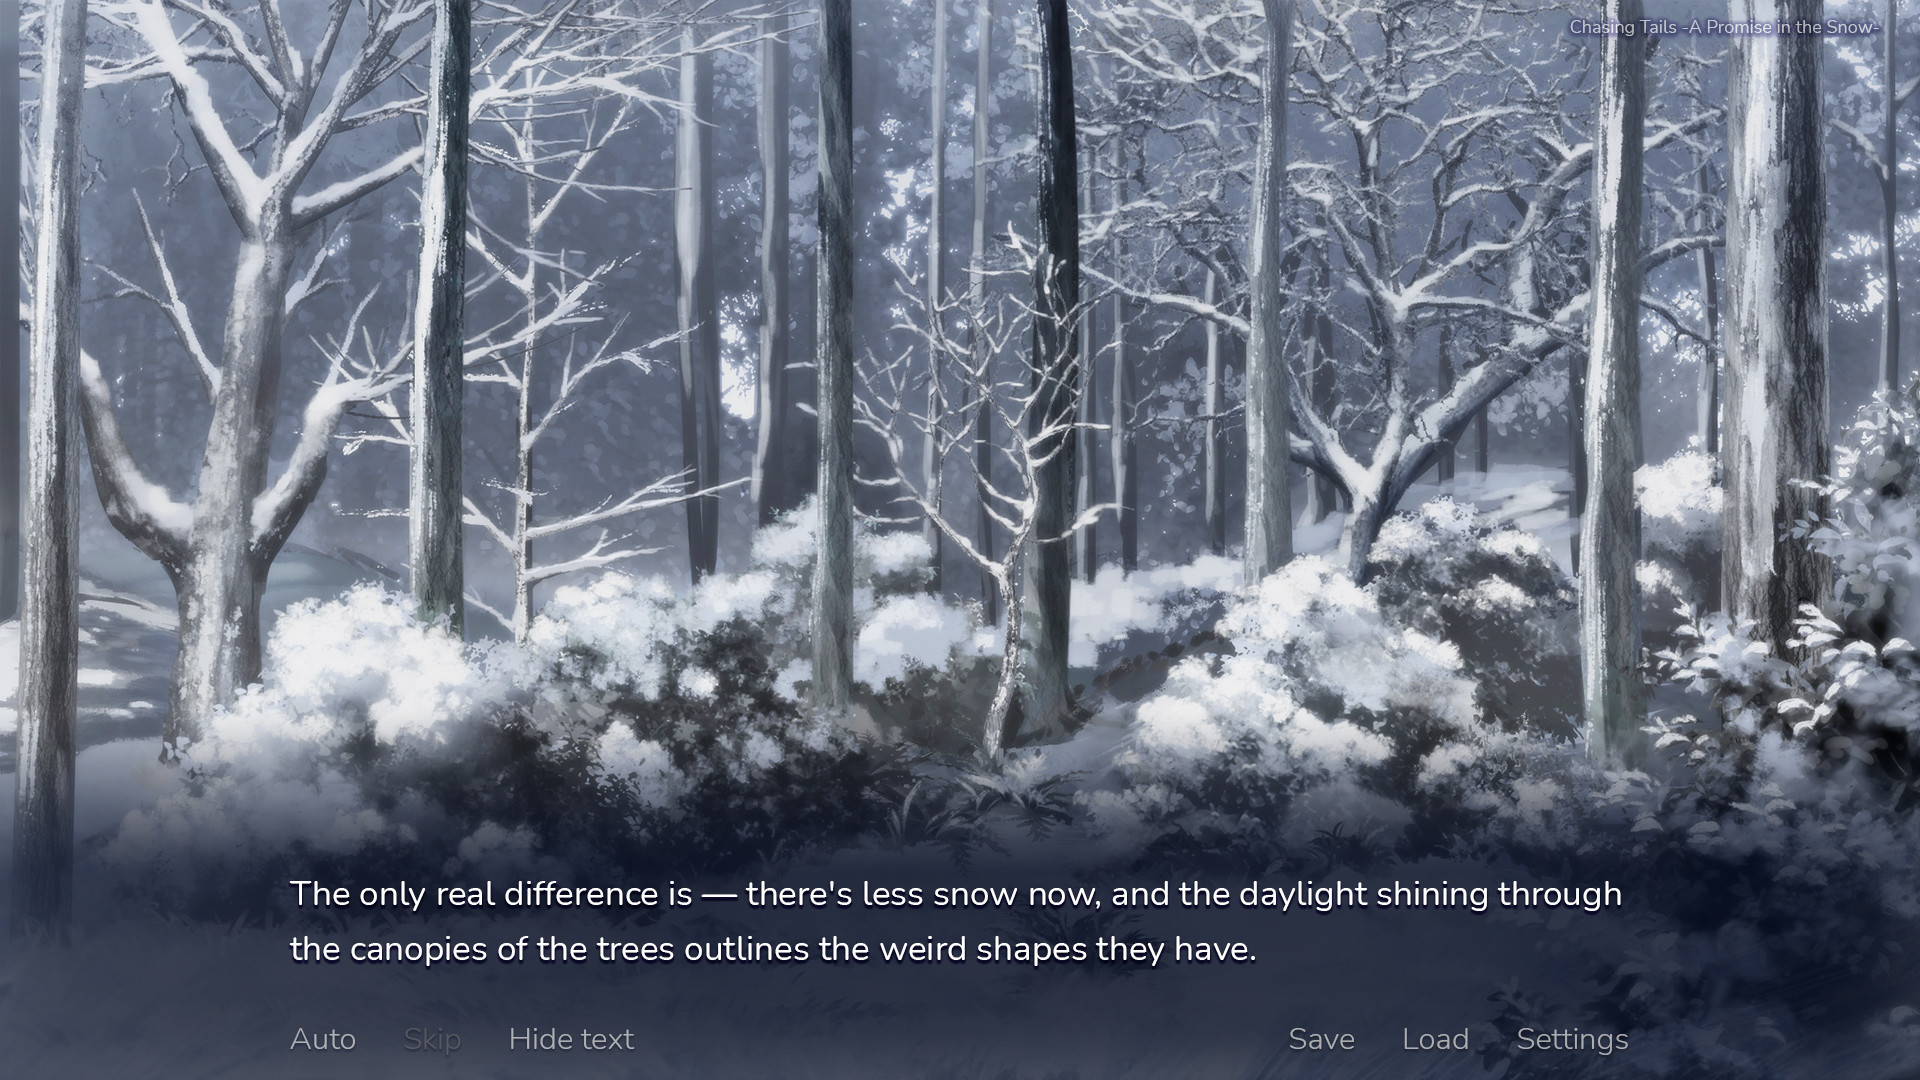 Chasing Tails -A Promise in the Snow- screenshot